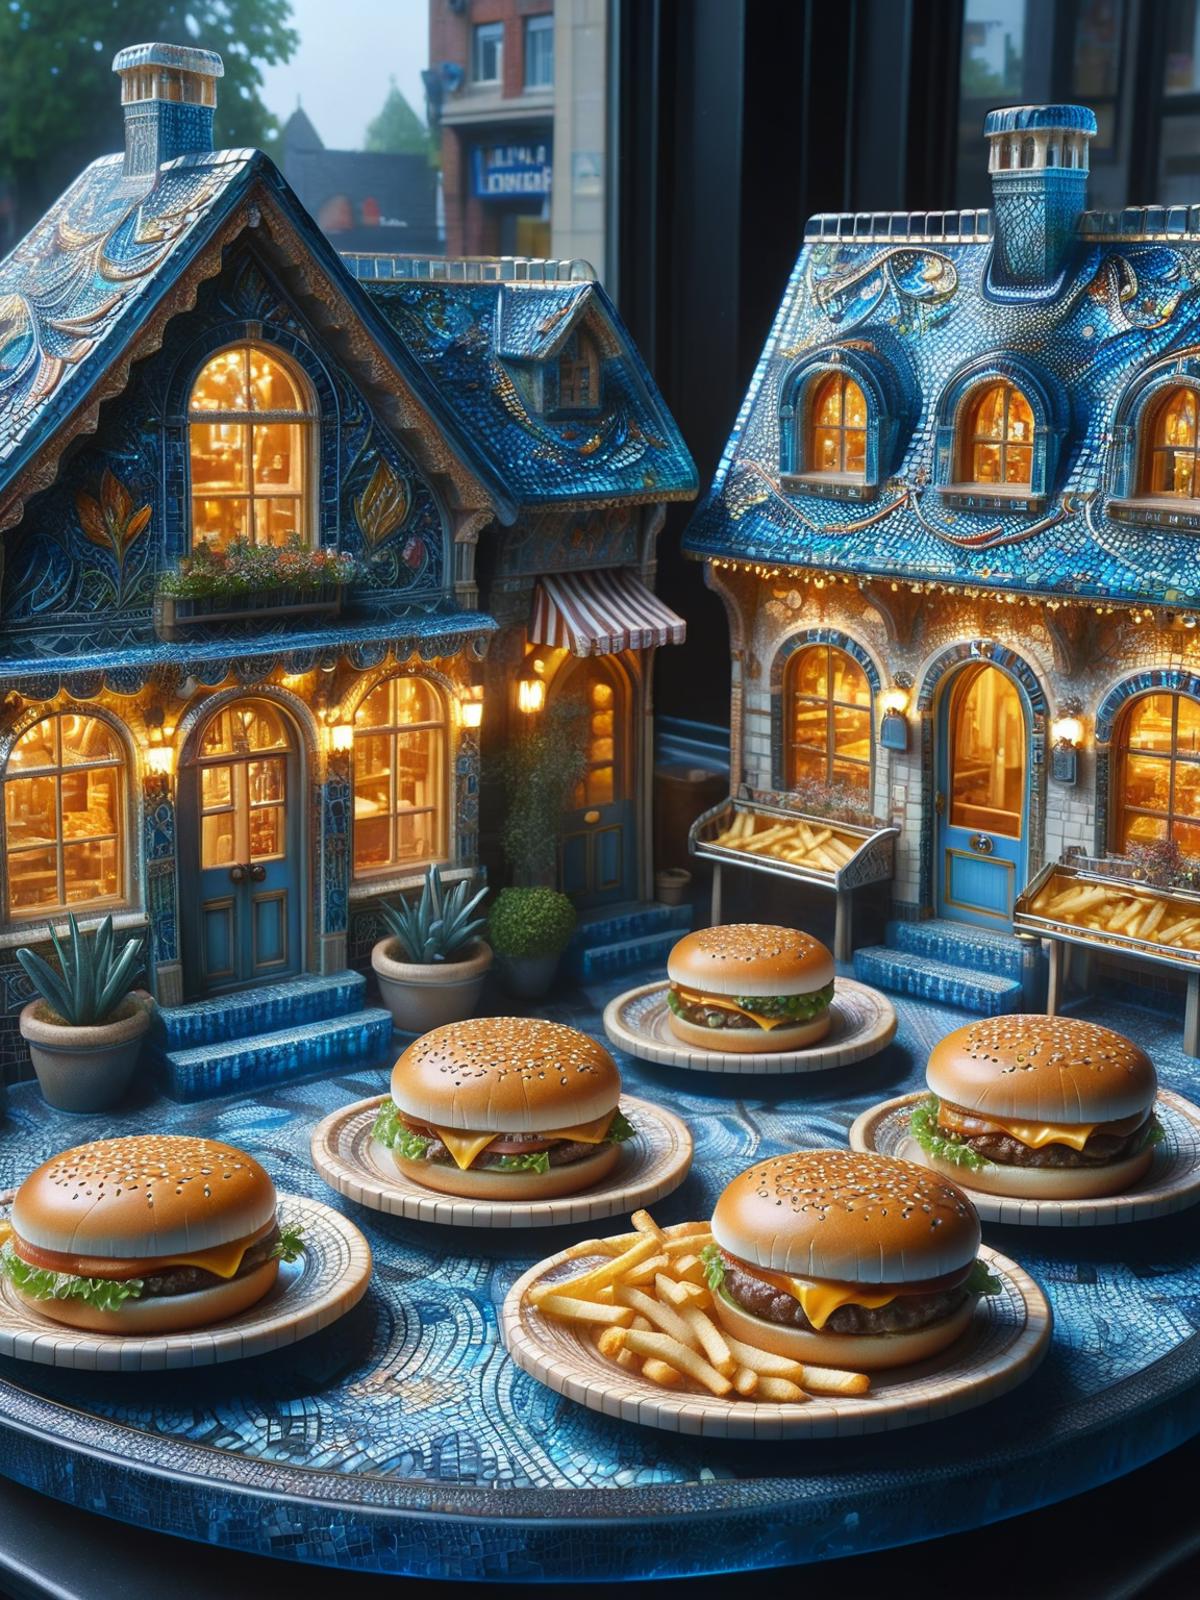 Detailed view of a model house with a miniature restaurant and a table of burgers and fries.